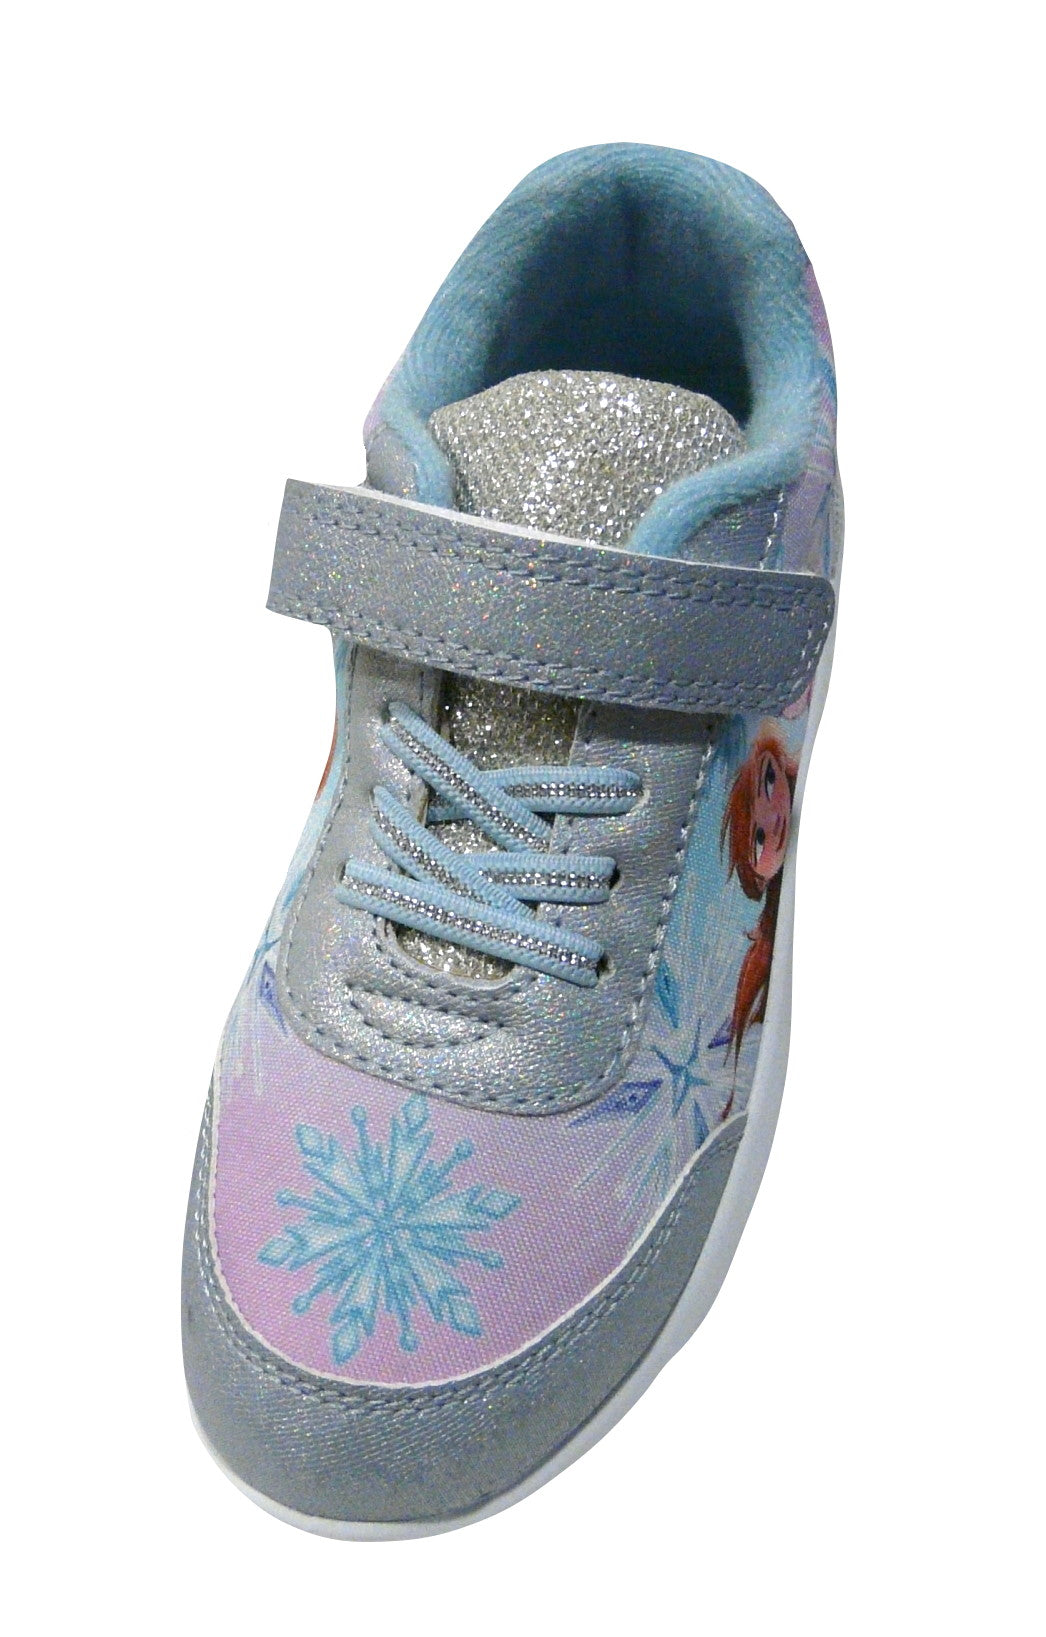 Girls Frozen Blue and Silver Touch and Close Low Top Trainers